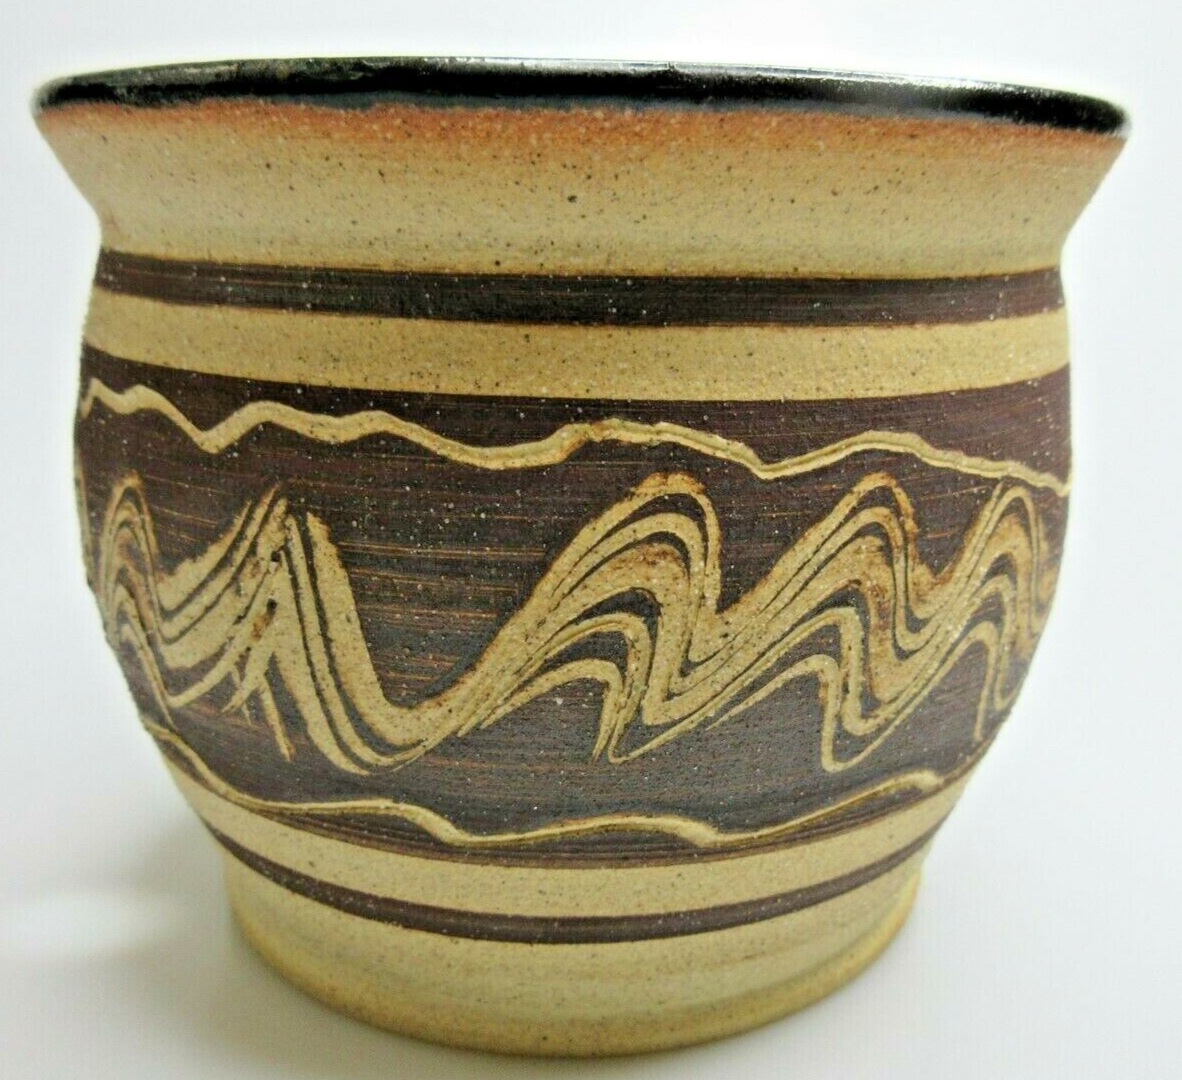 Primary image for Vintage Handspun Artisan Pottery Planter Etched Signed Gil Gillespie 1985 Retro